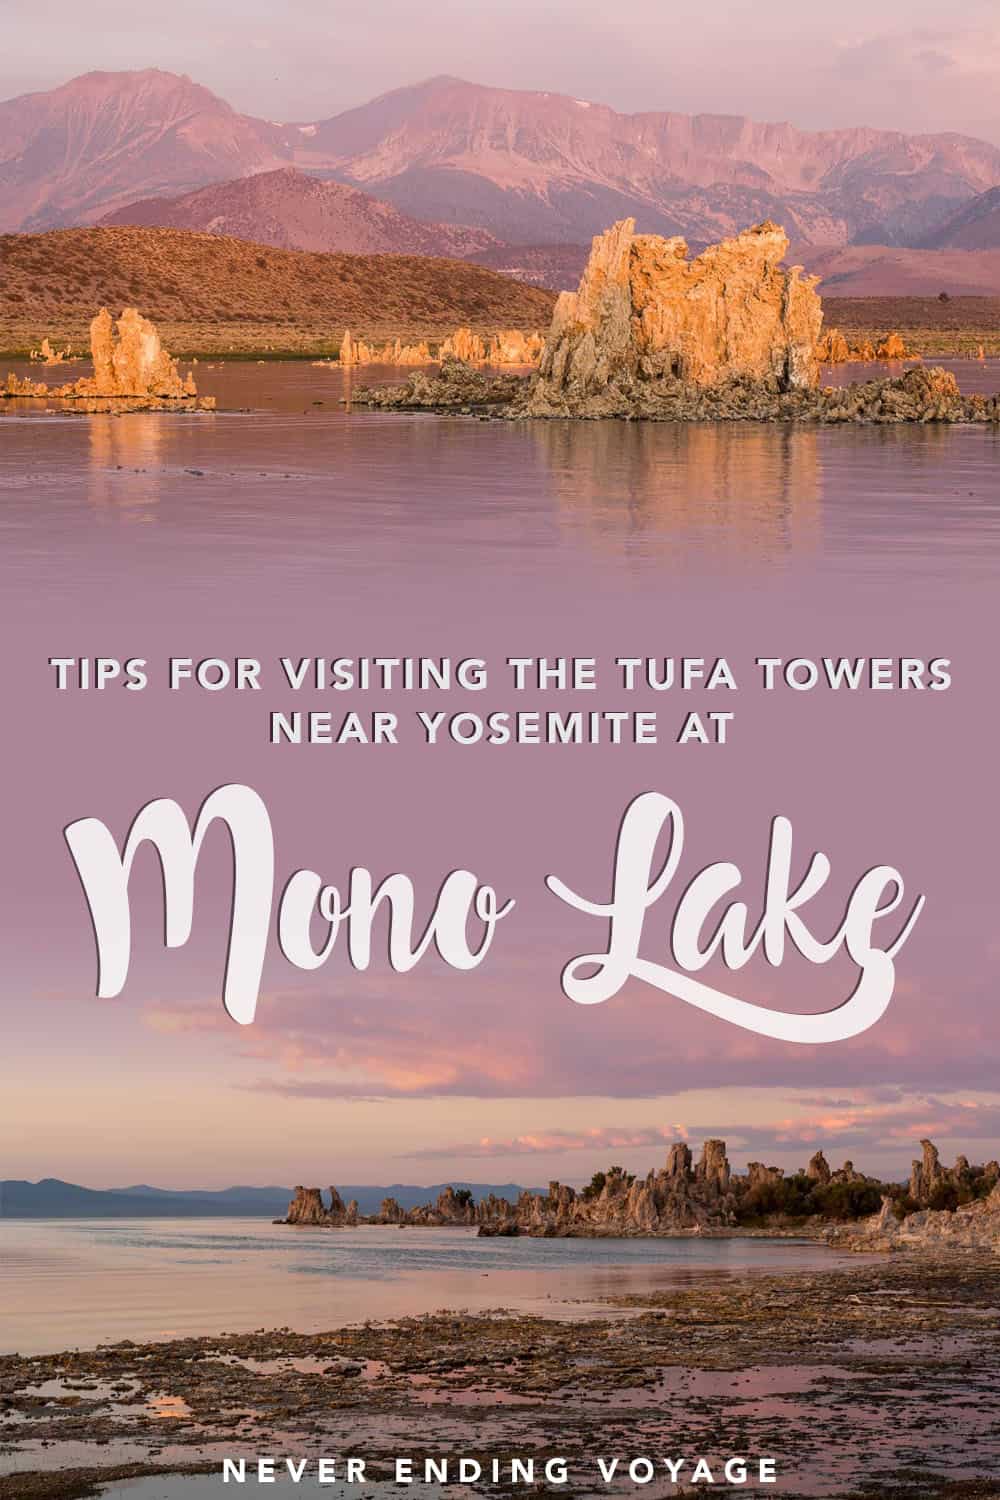 Here's all you need to know for visiting Mono Lake, a cool side road trip from Yosemite National Park in California!